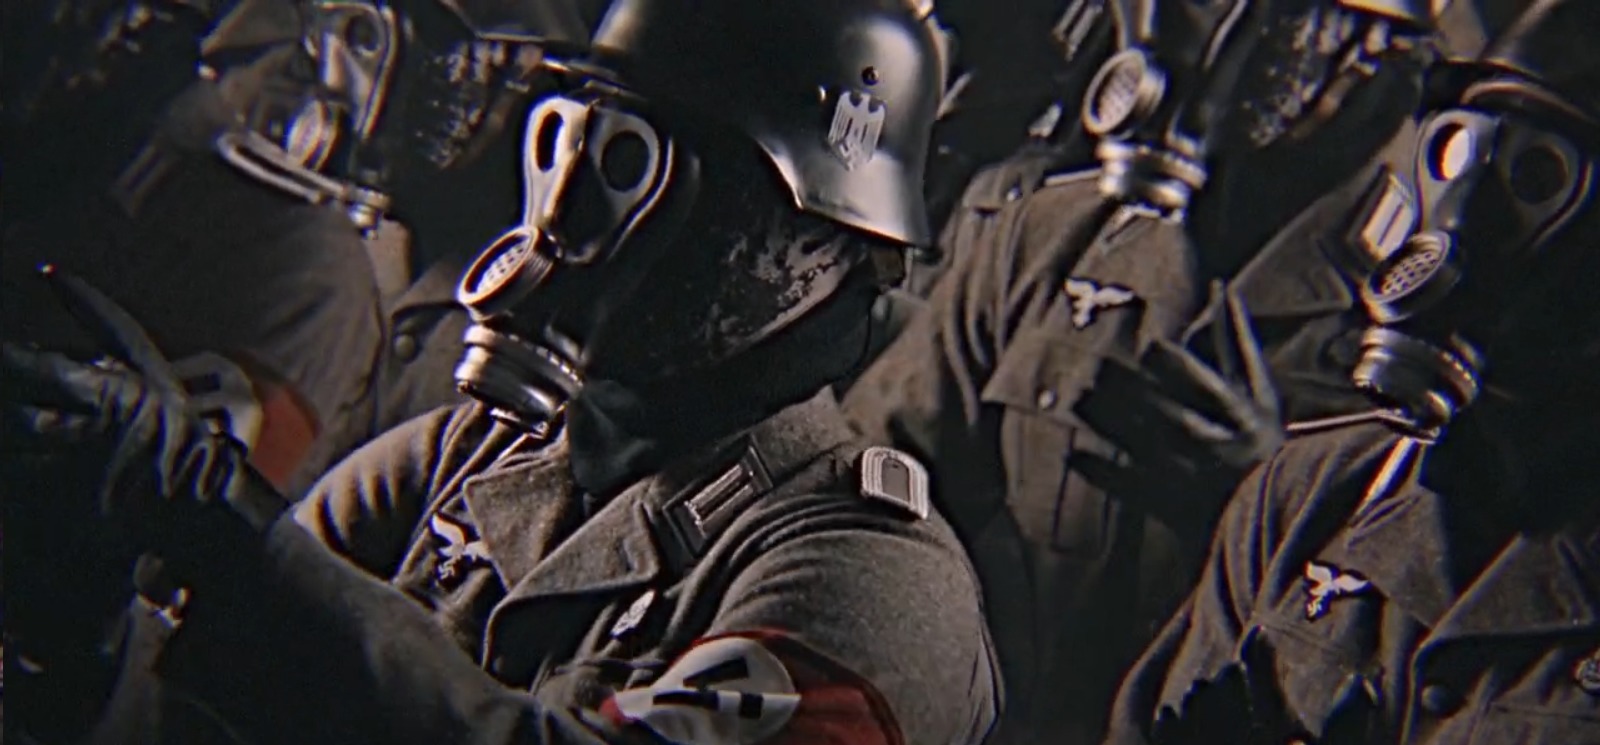 Vlad Micu as a Nazi Soldier in Kung Fury at minute 17.54